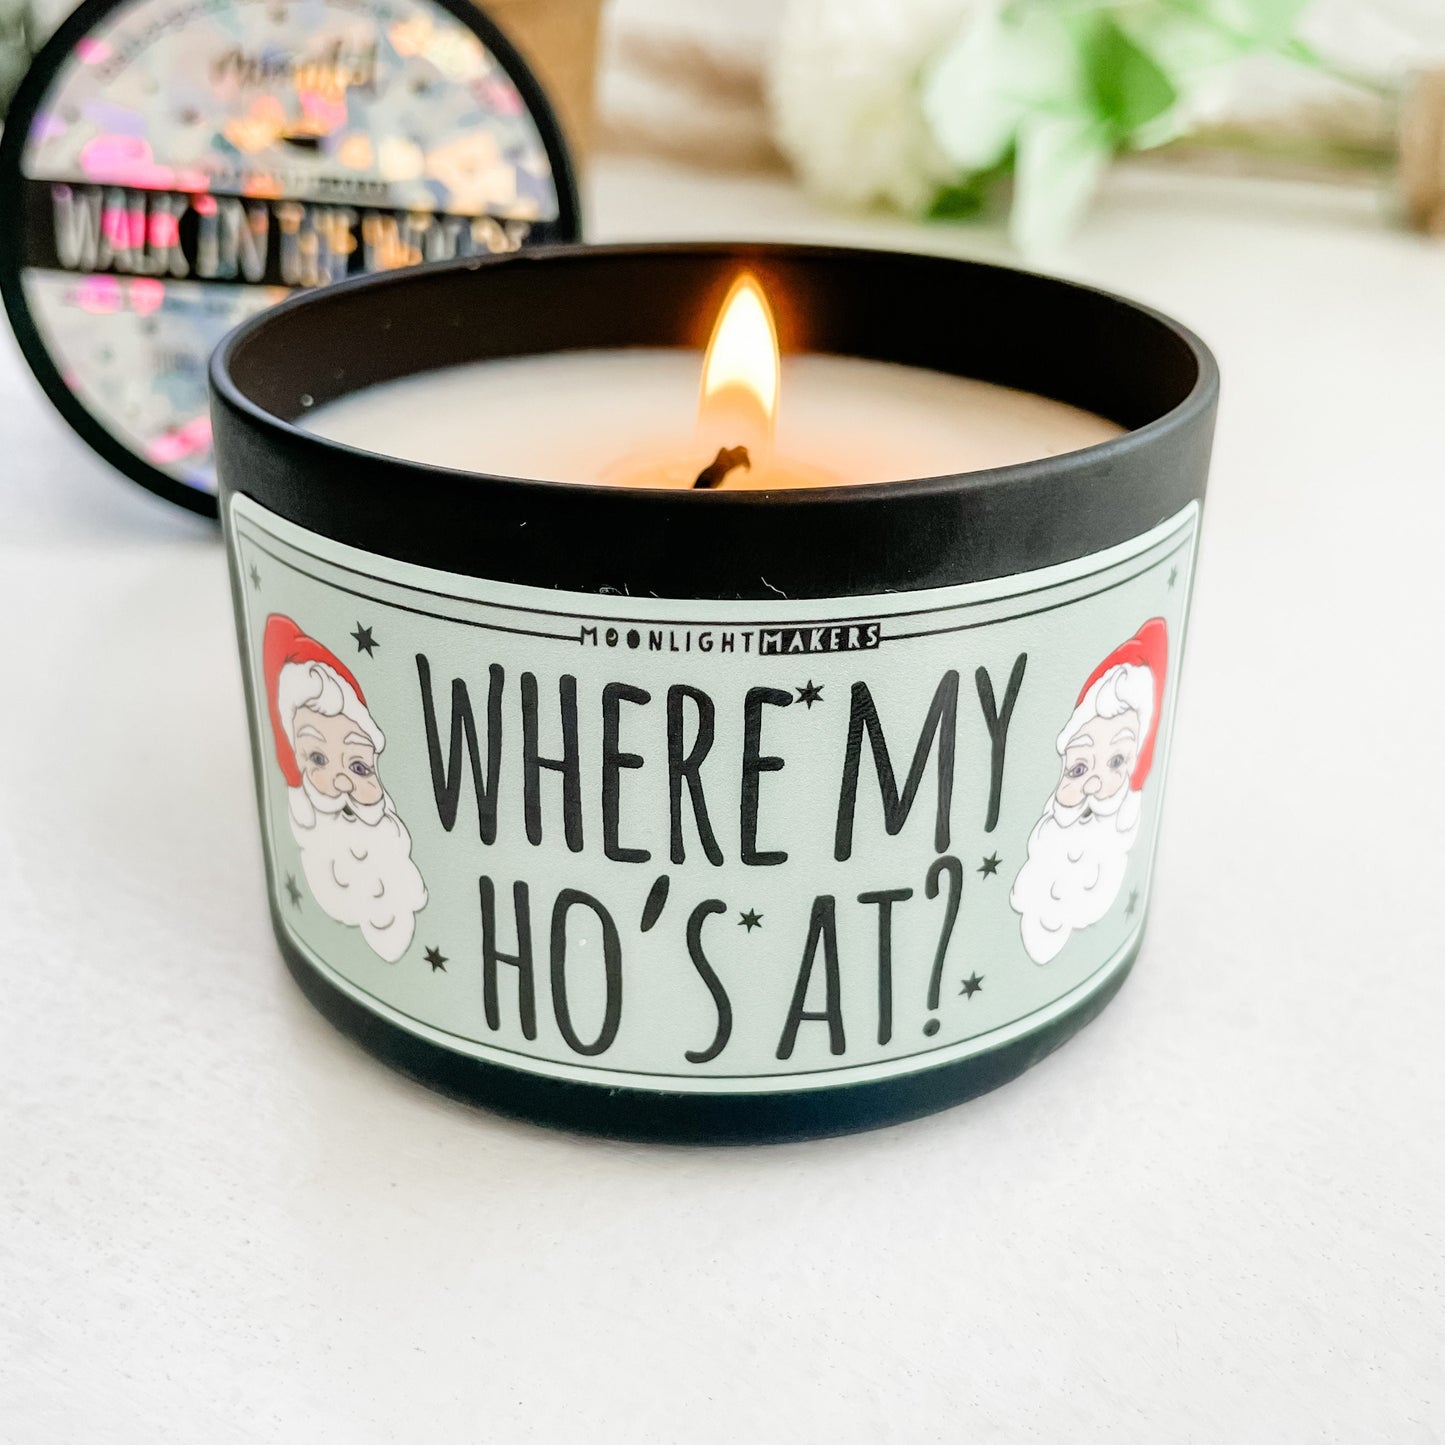 Where My Ho's At? - 8oz Candle - Choose Your Scent - 100% Natural Soy Wax